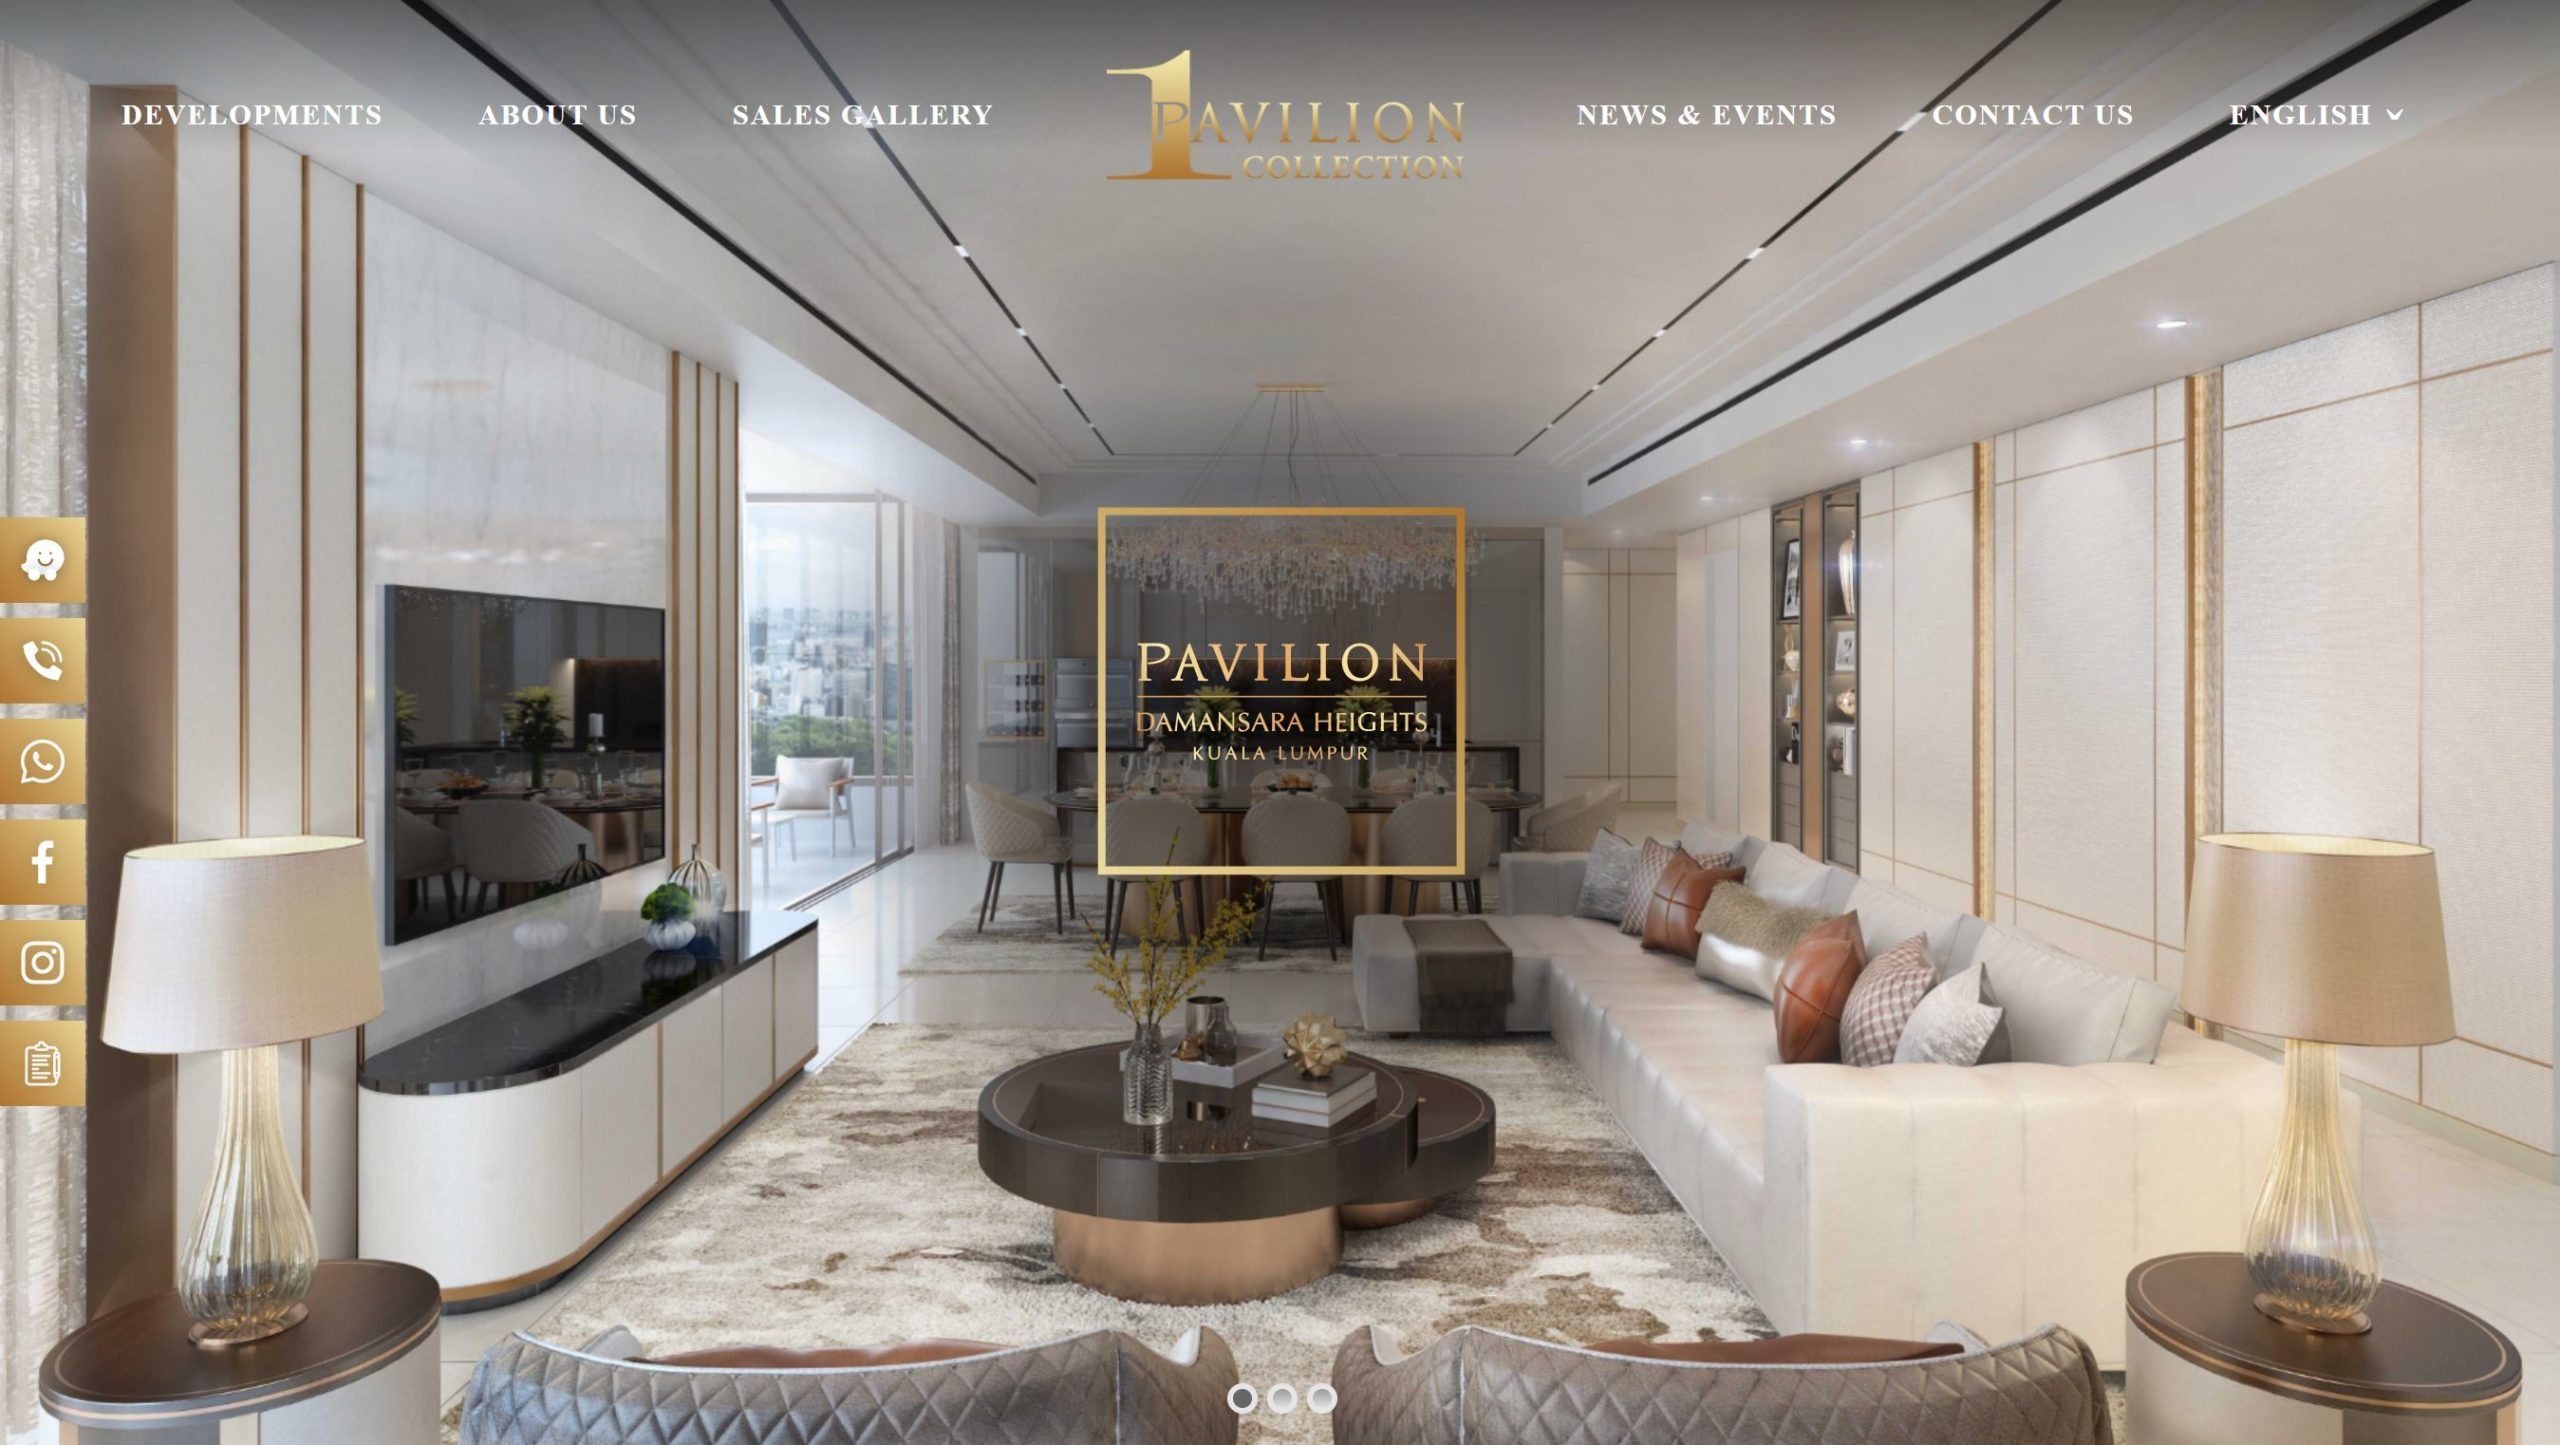 AUGMENT Malaysia and AUGMENT Thailand Collaborate on Bilingual Website Design and Development for Leading Luxury Property Development Company 1 Pavillion.